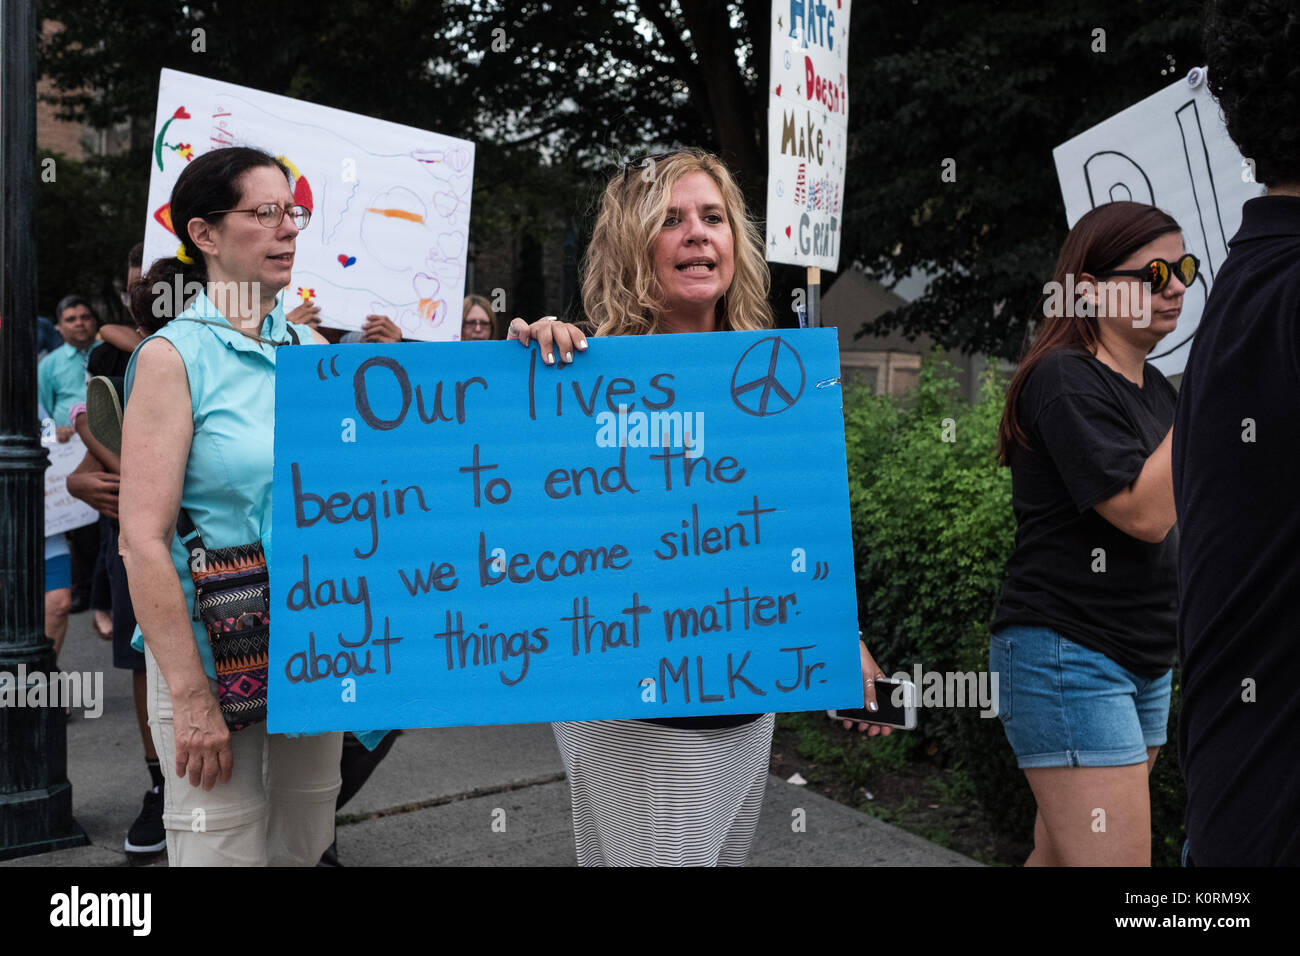 Residents of a small town in lower Hudson Valley in New York State protest against President Trumps  and the racial tensions in Charlottesville Stock Photo